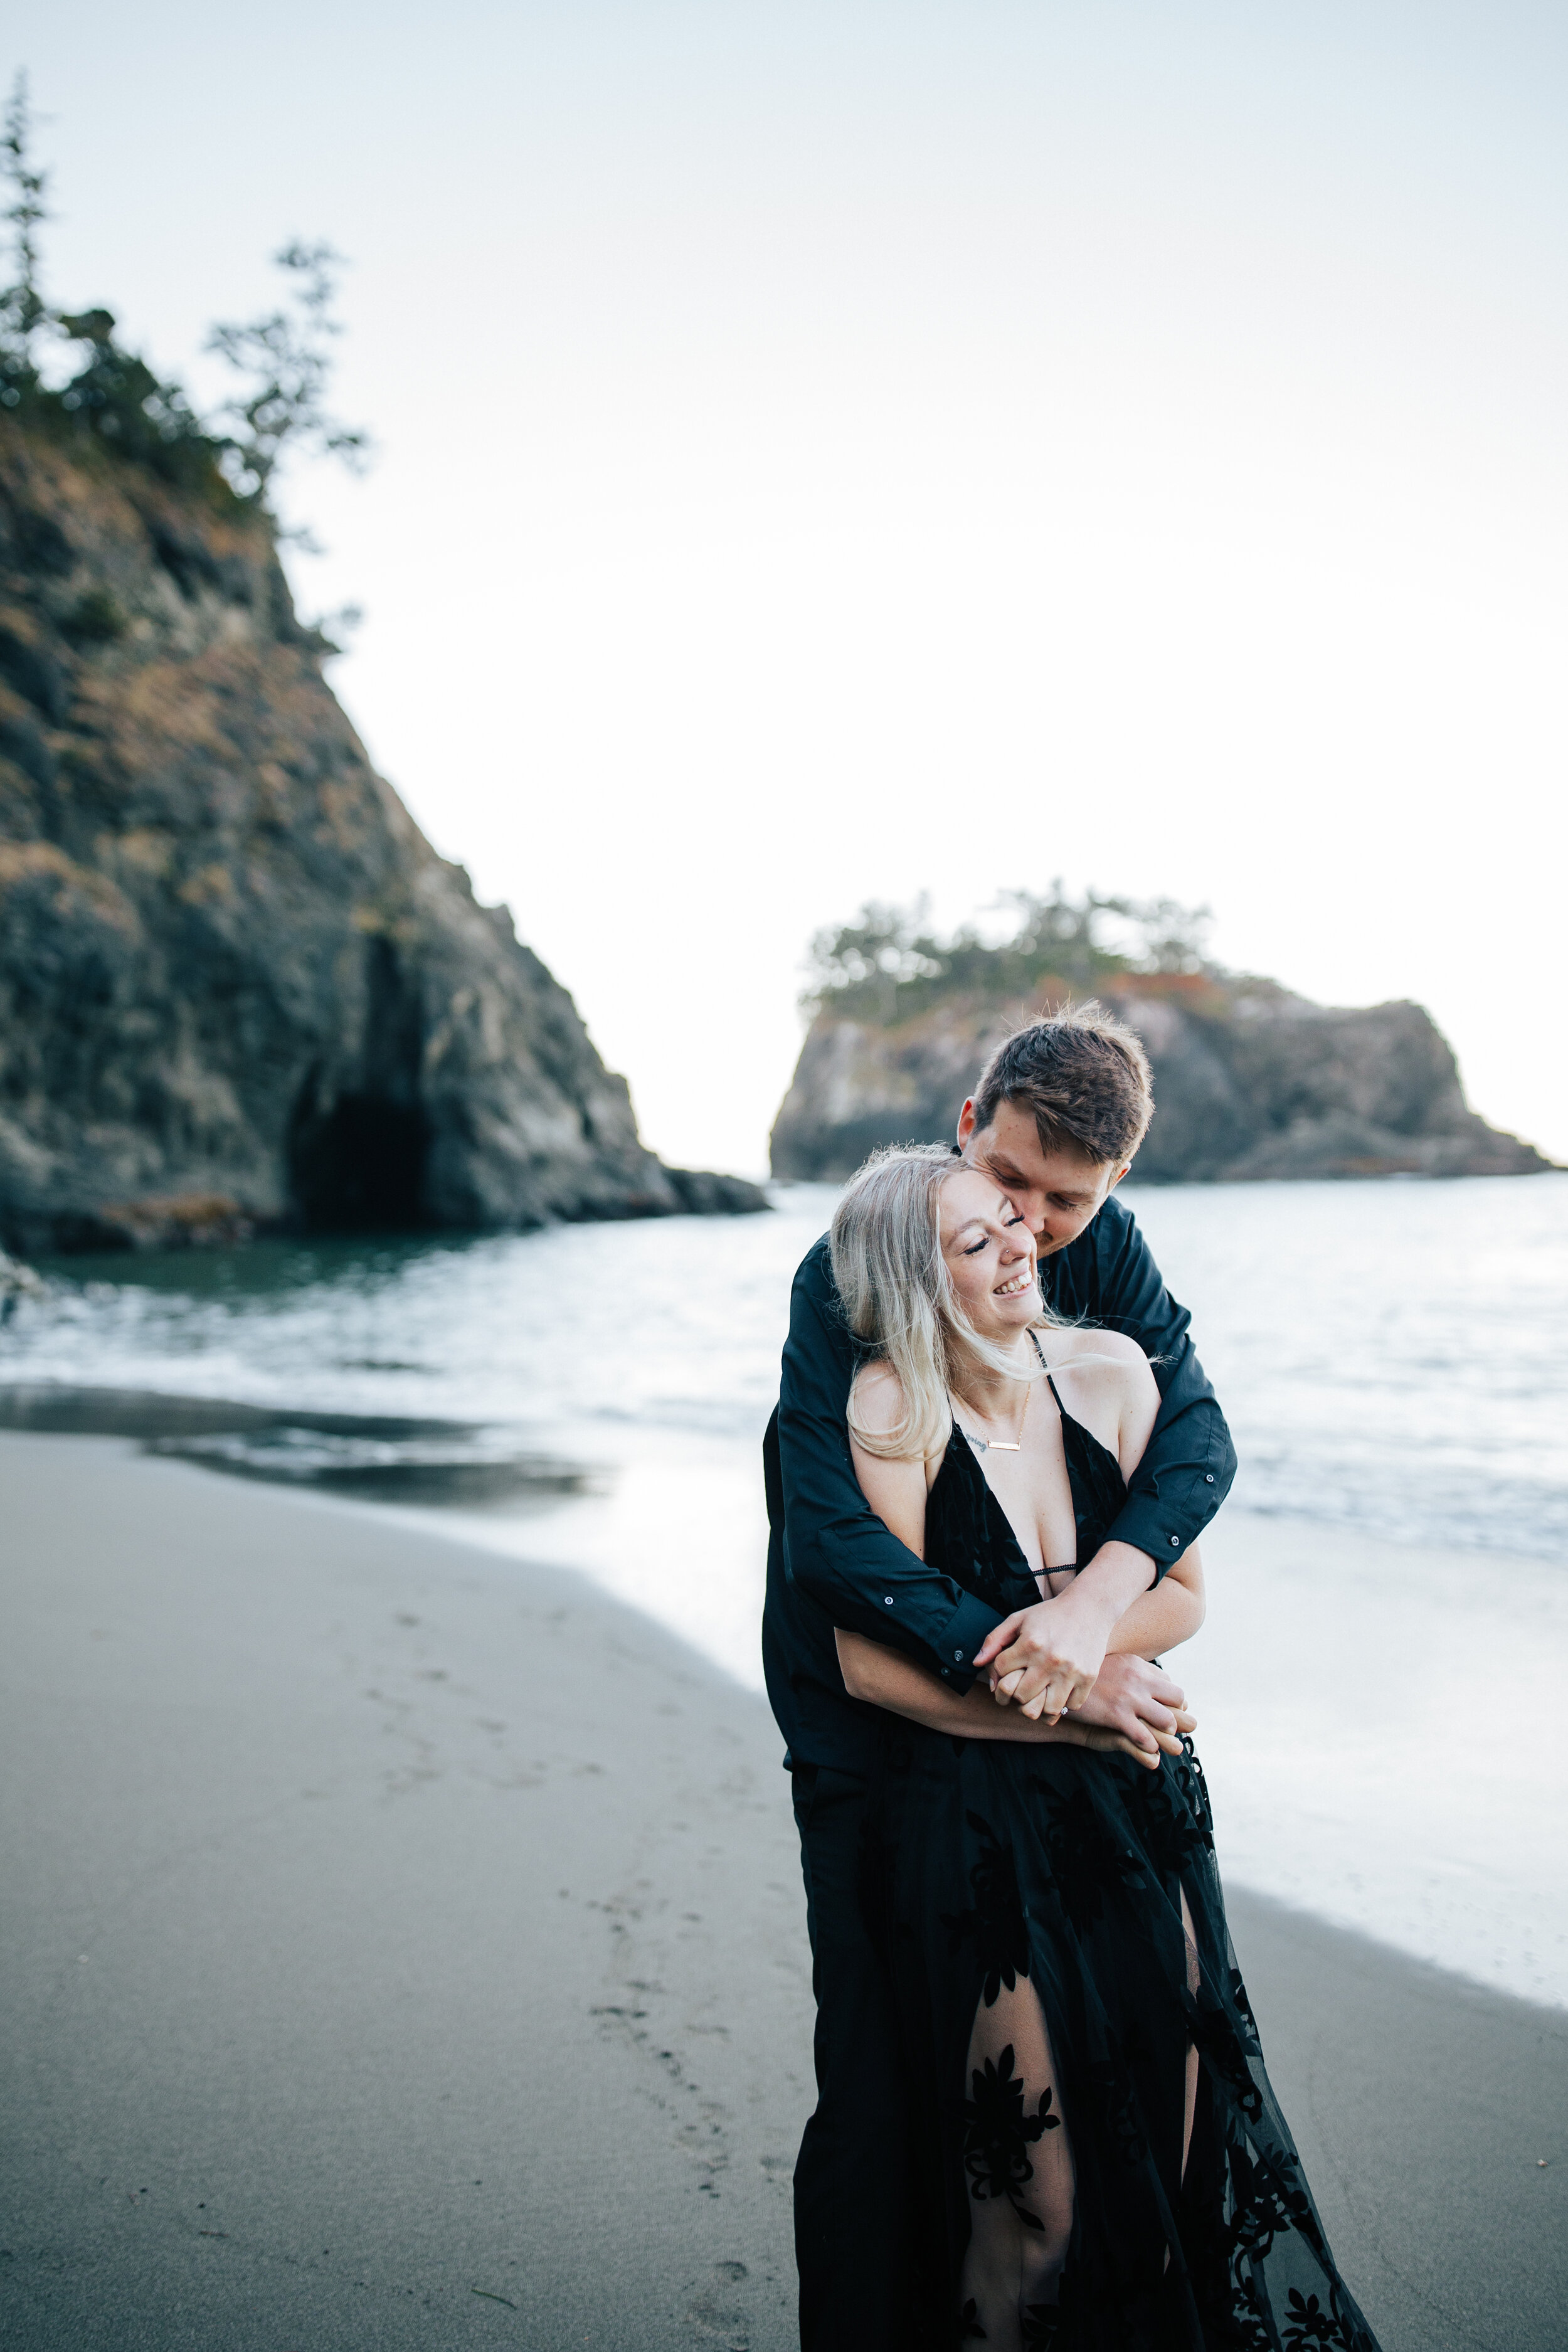  Samuel H Boardman Scenic Corridor southern Oregon coast elopement bride and groom saying their vows on a cliff on the Oregon coast with sea stacks and the ocean below black bridal gown couple in all black a groom holds his new bride as they walk on 